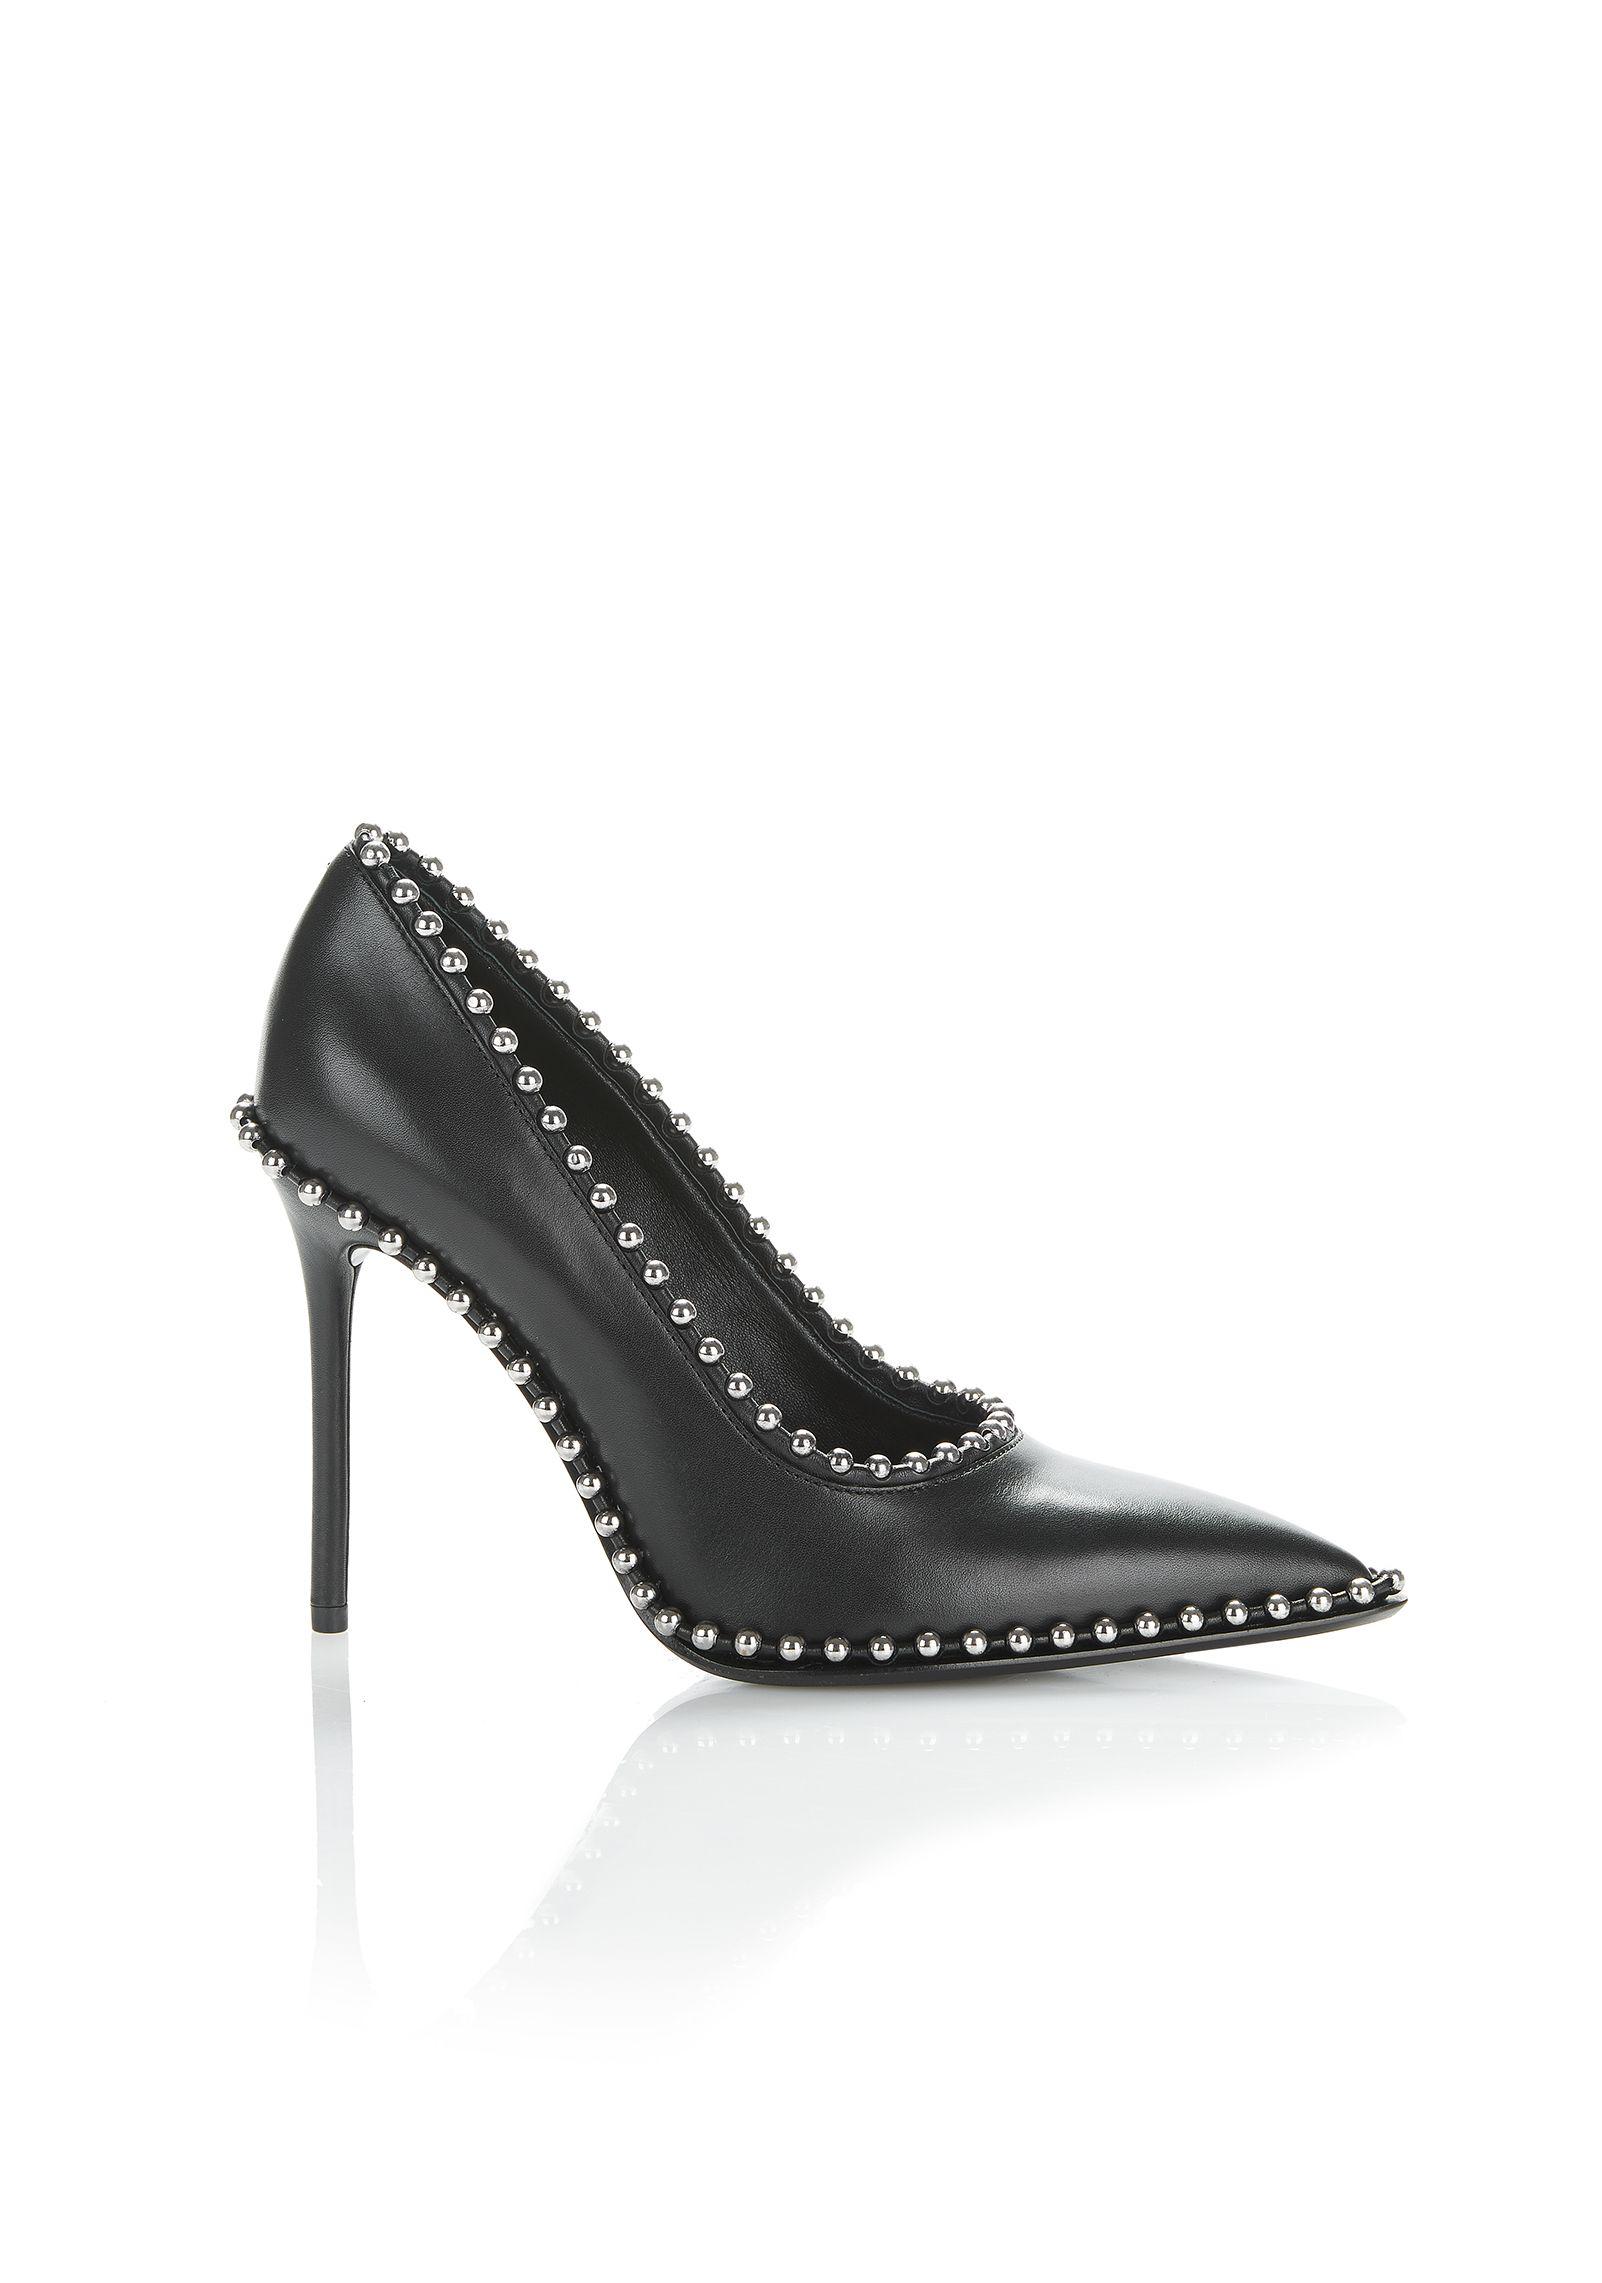 Alexander Wang Leather Rie Pump in Black - Lyst